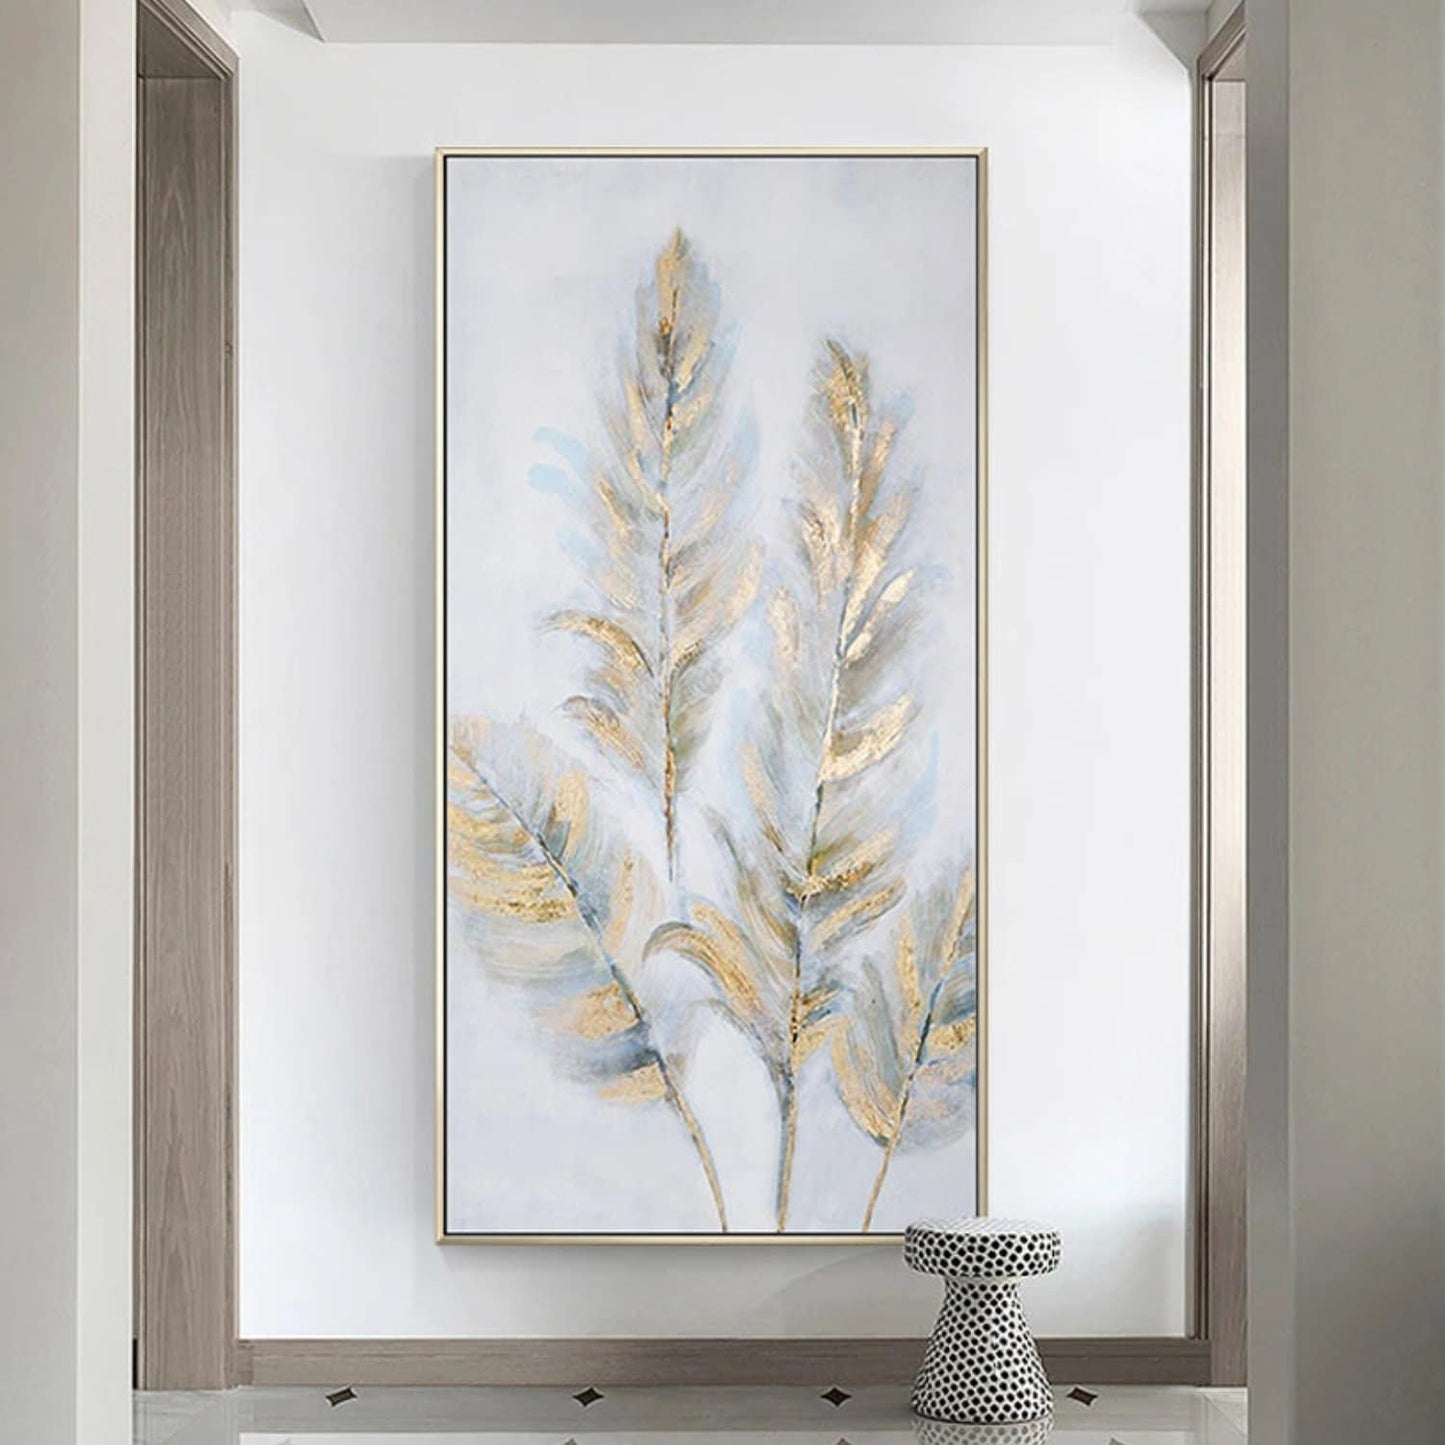 Abstract Gold Textured Feathers Canvas Painting